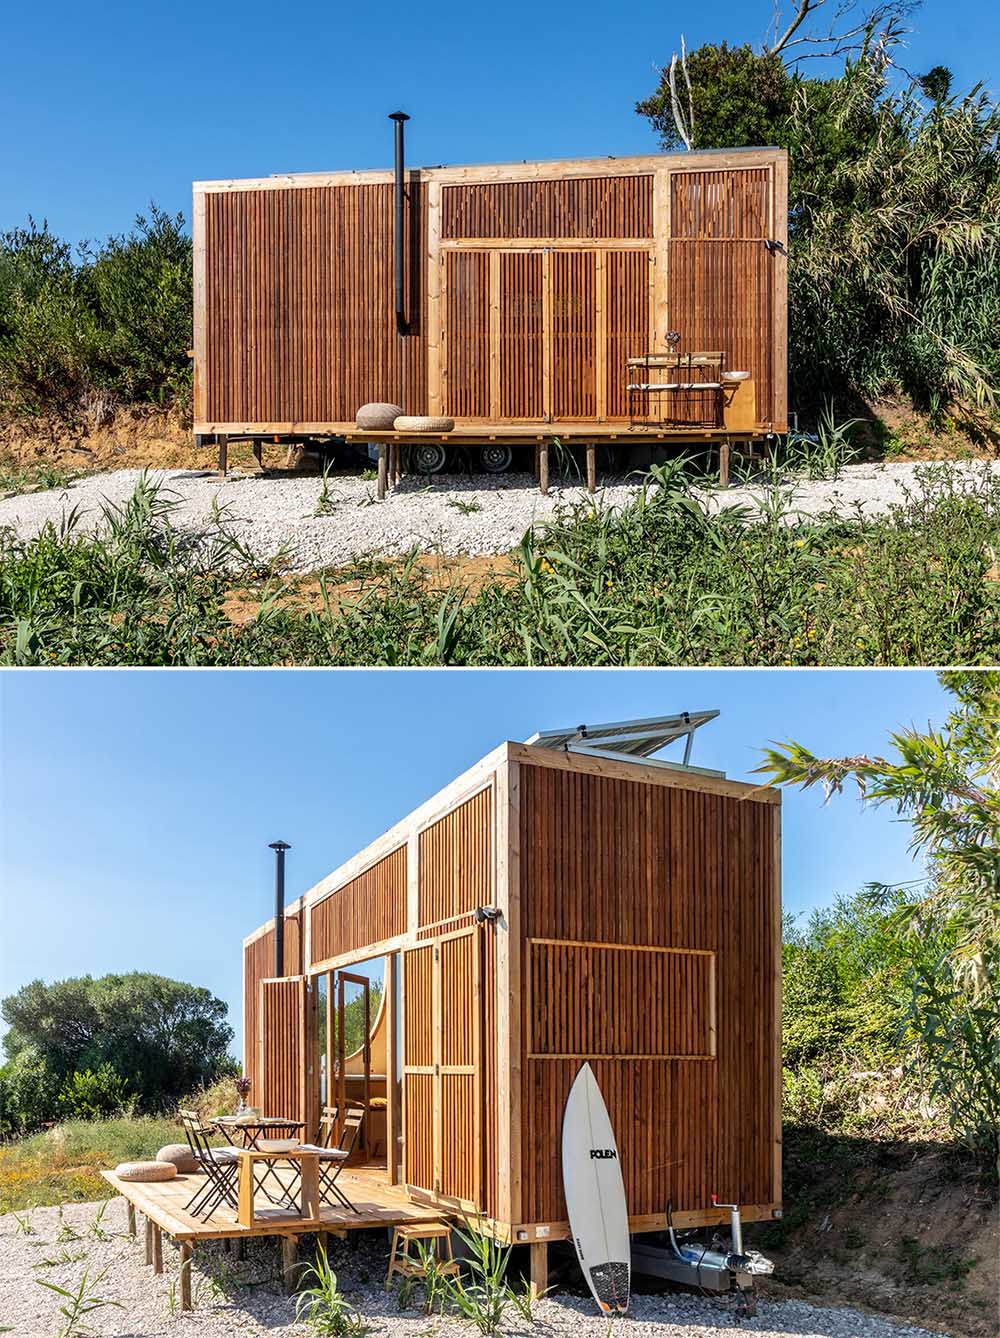 A modern tiny house covered in heat-treated timber, has a birch plywood interior, kitchen, bathroom, and two sleeping areas.